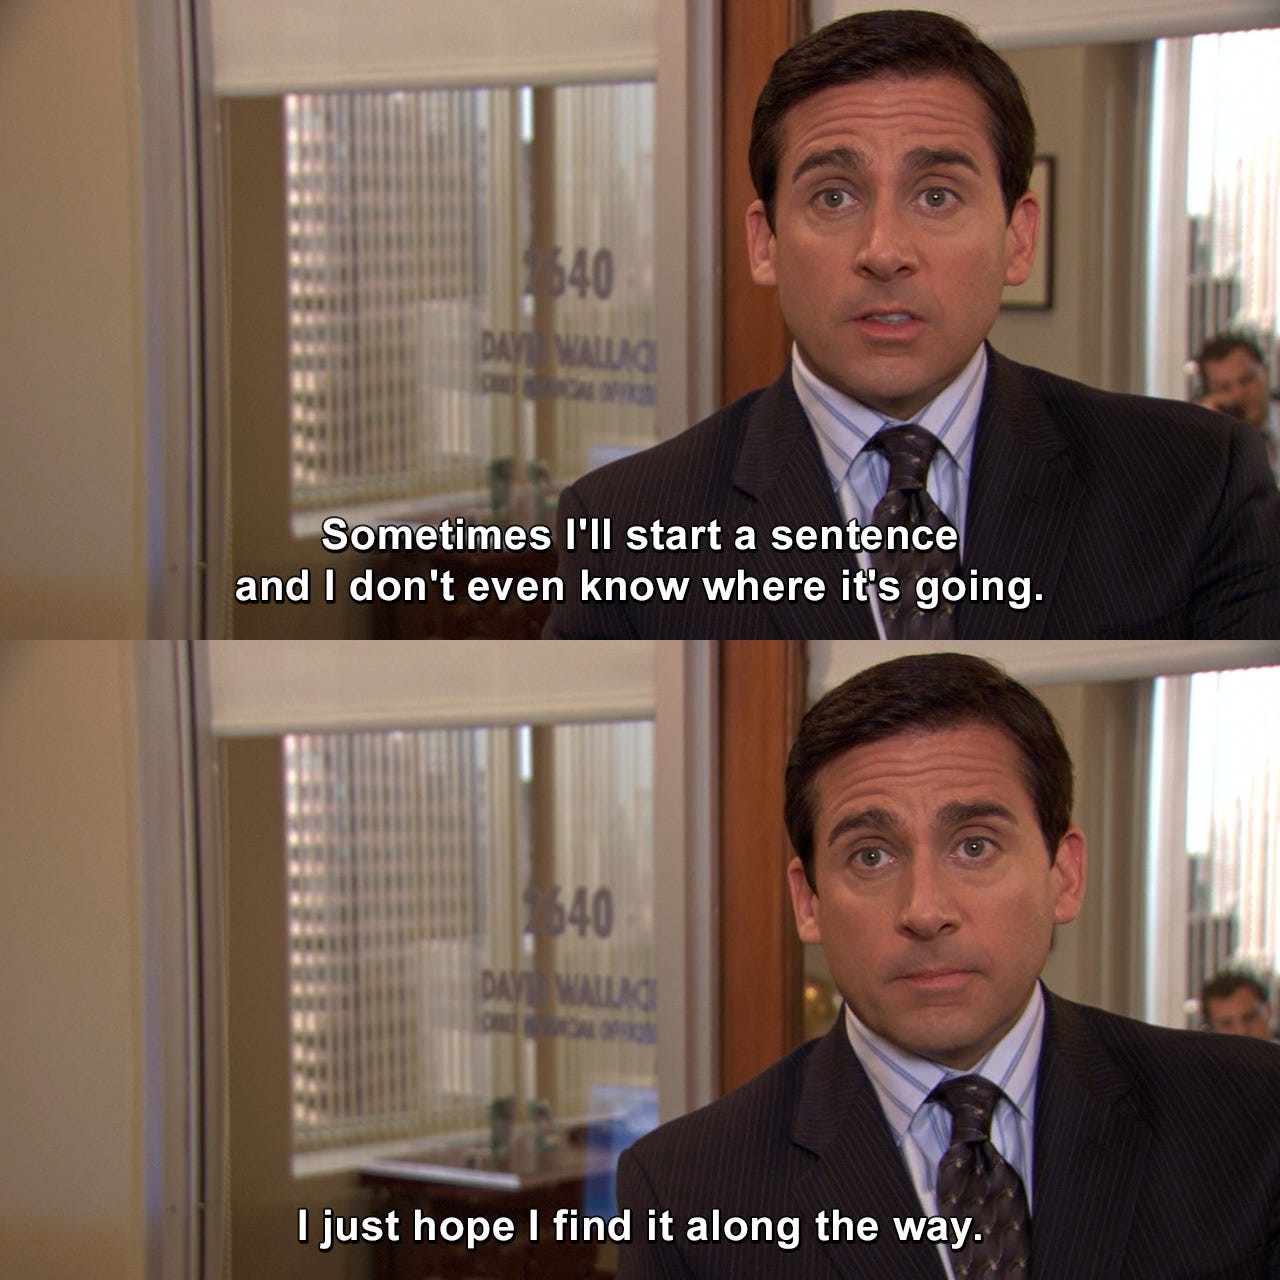 Michael Scott quote: "Sometimes I'll start a sentence and I don't even know where it's going. I just hope I find it along the way"